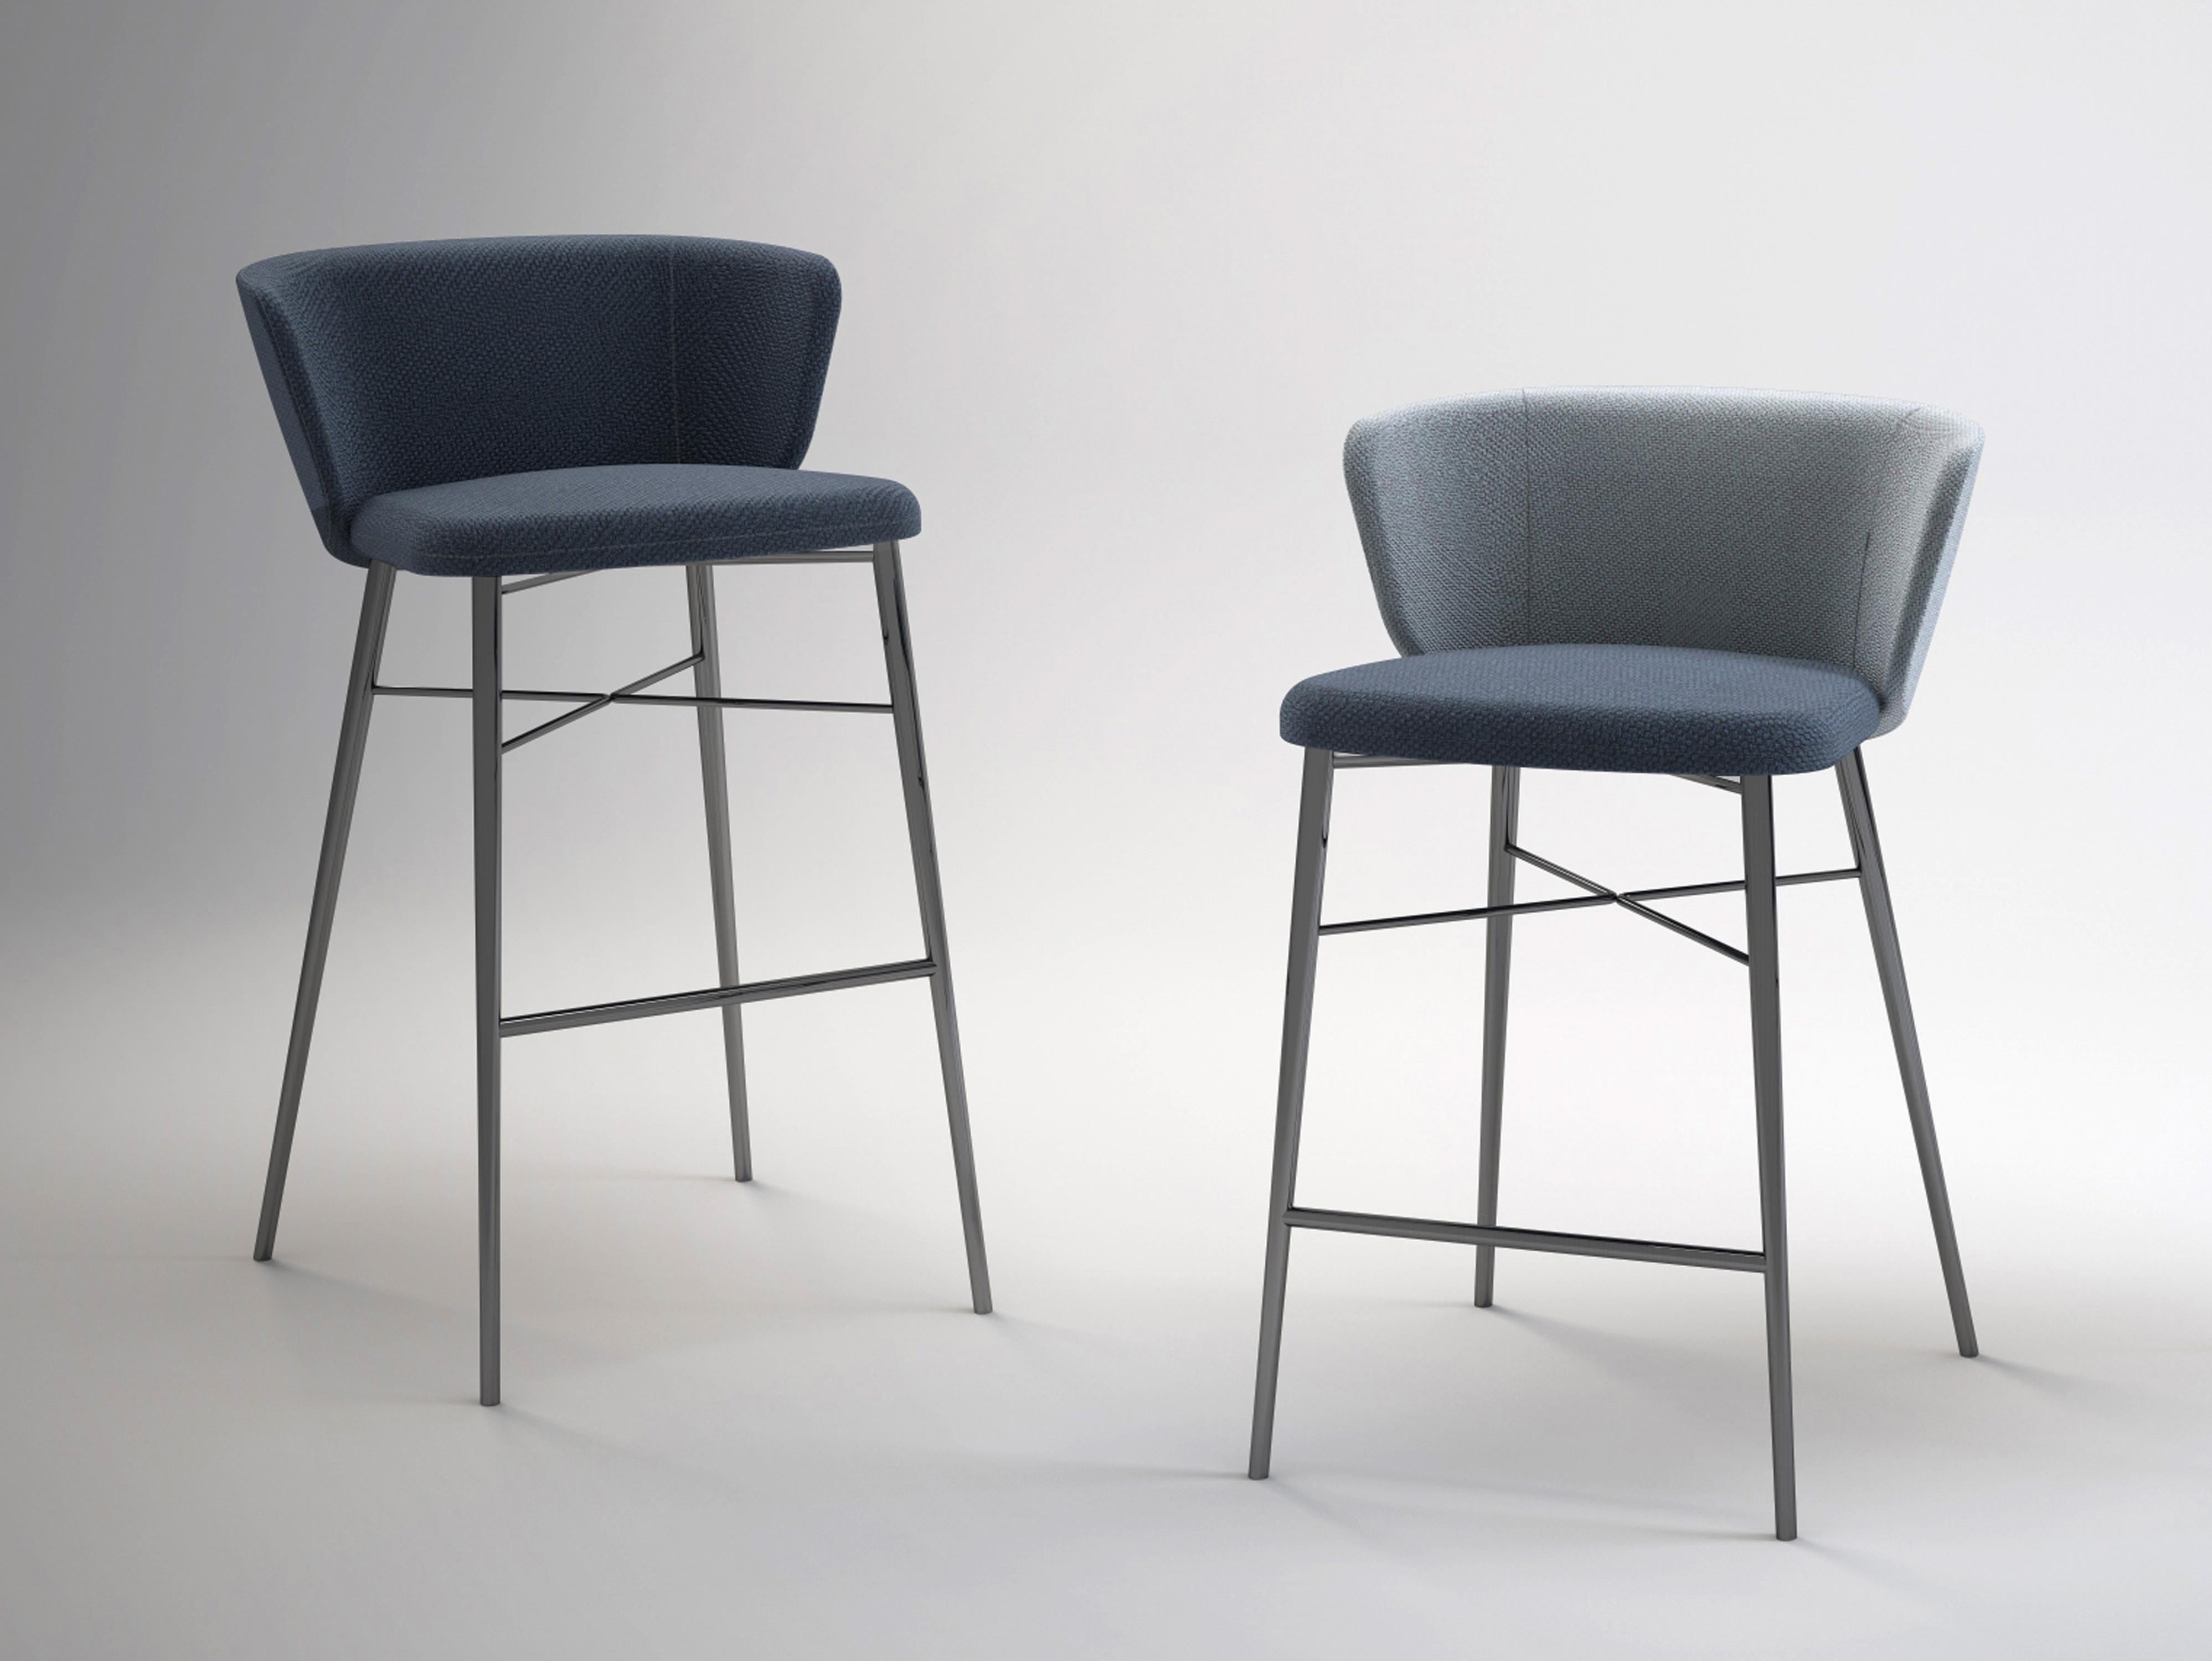 A range of padded chairs with mini armrests and stools with structures made of matt black RAL 9005 (n) or metallic silver (am) epoxy powder coated, chrome steel tubes. Flexible polyurethane backrest, cold, processed without CFC. Non-removable covers